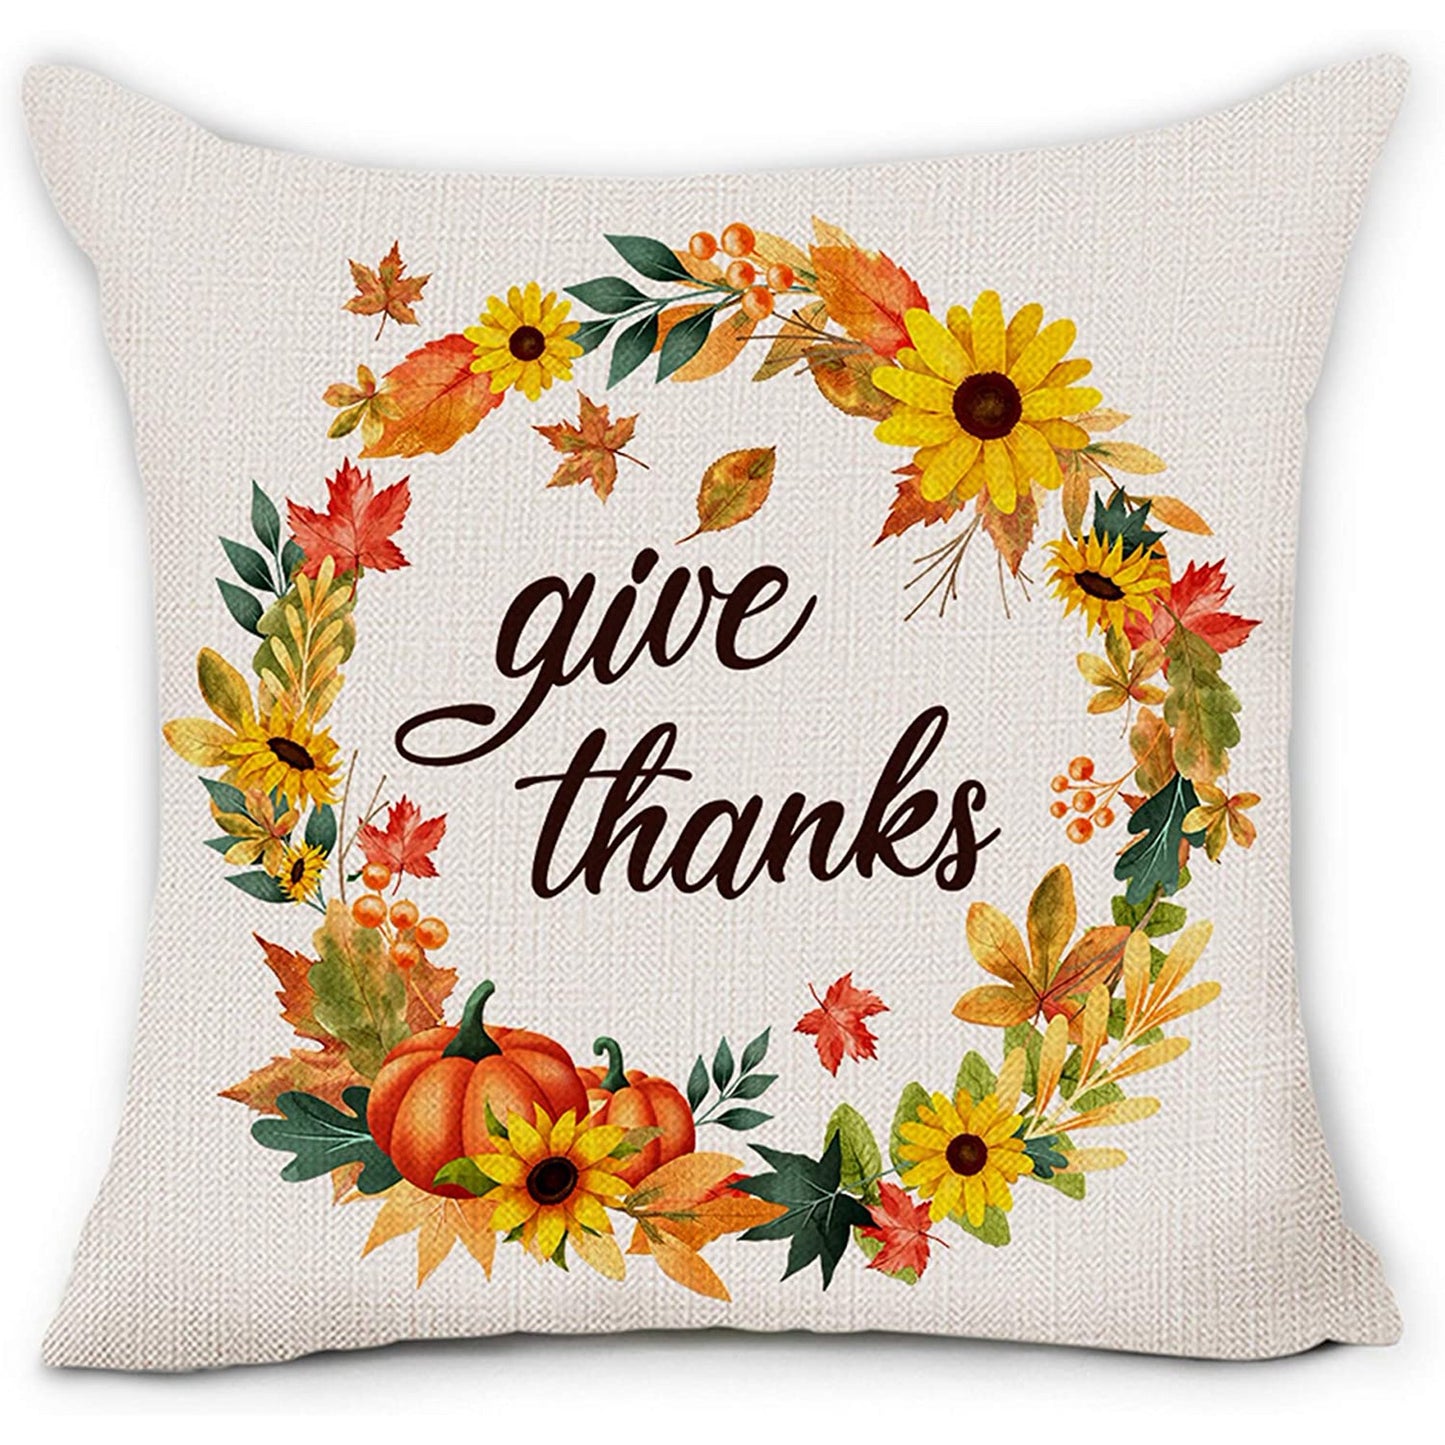 Homely Fall Vibes: DecorX Farmhouse Pillow Covers Set of 4, Featuring Seasonal Pumpkins & Sunflowers